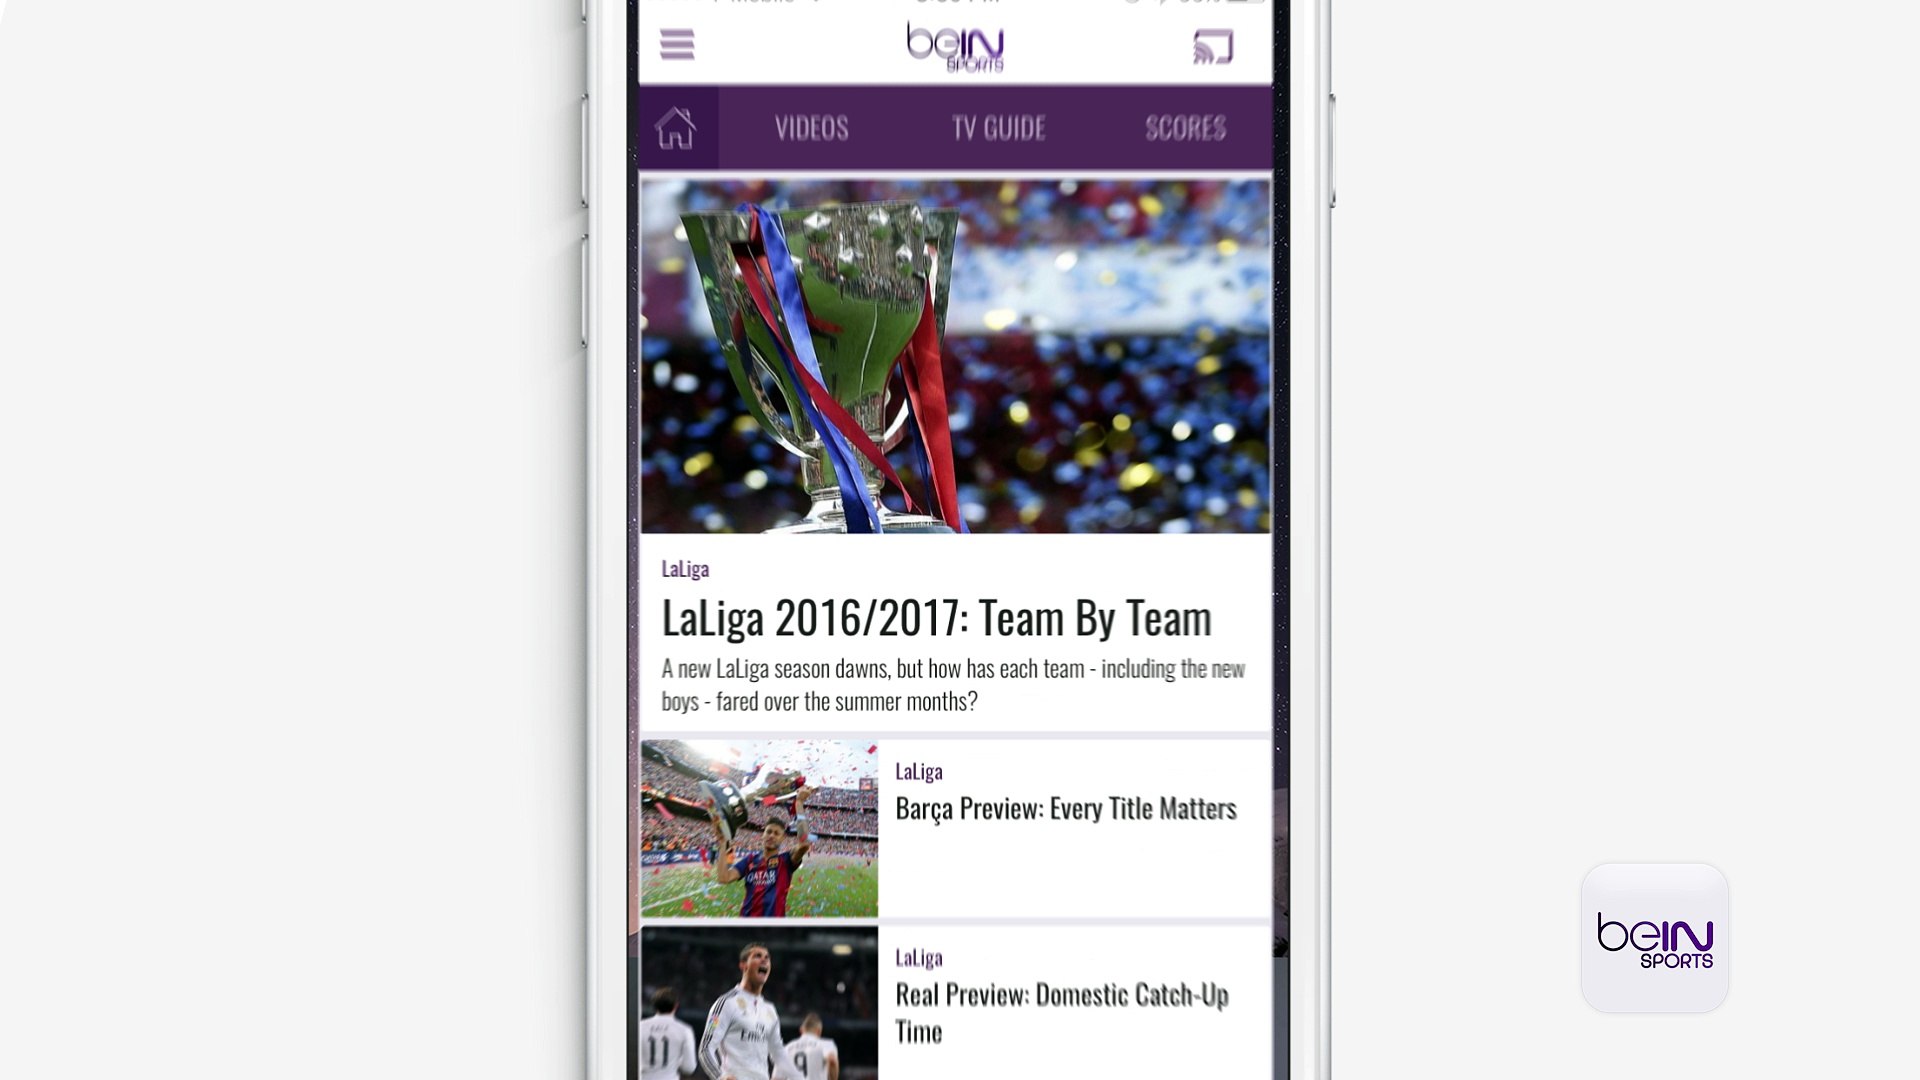 beIN SPORTS launches TWO BRAND NEW APPS! beIN SPORTS